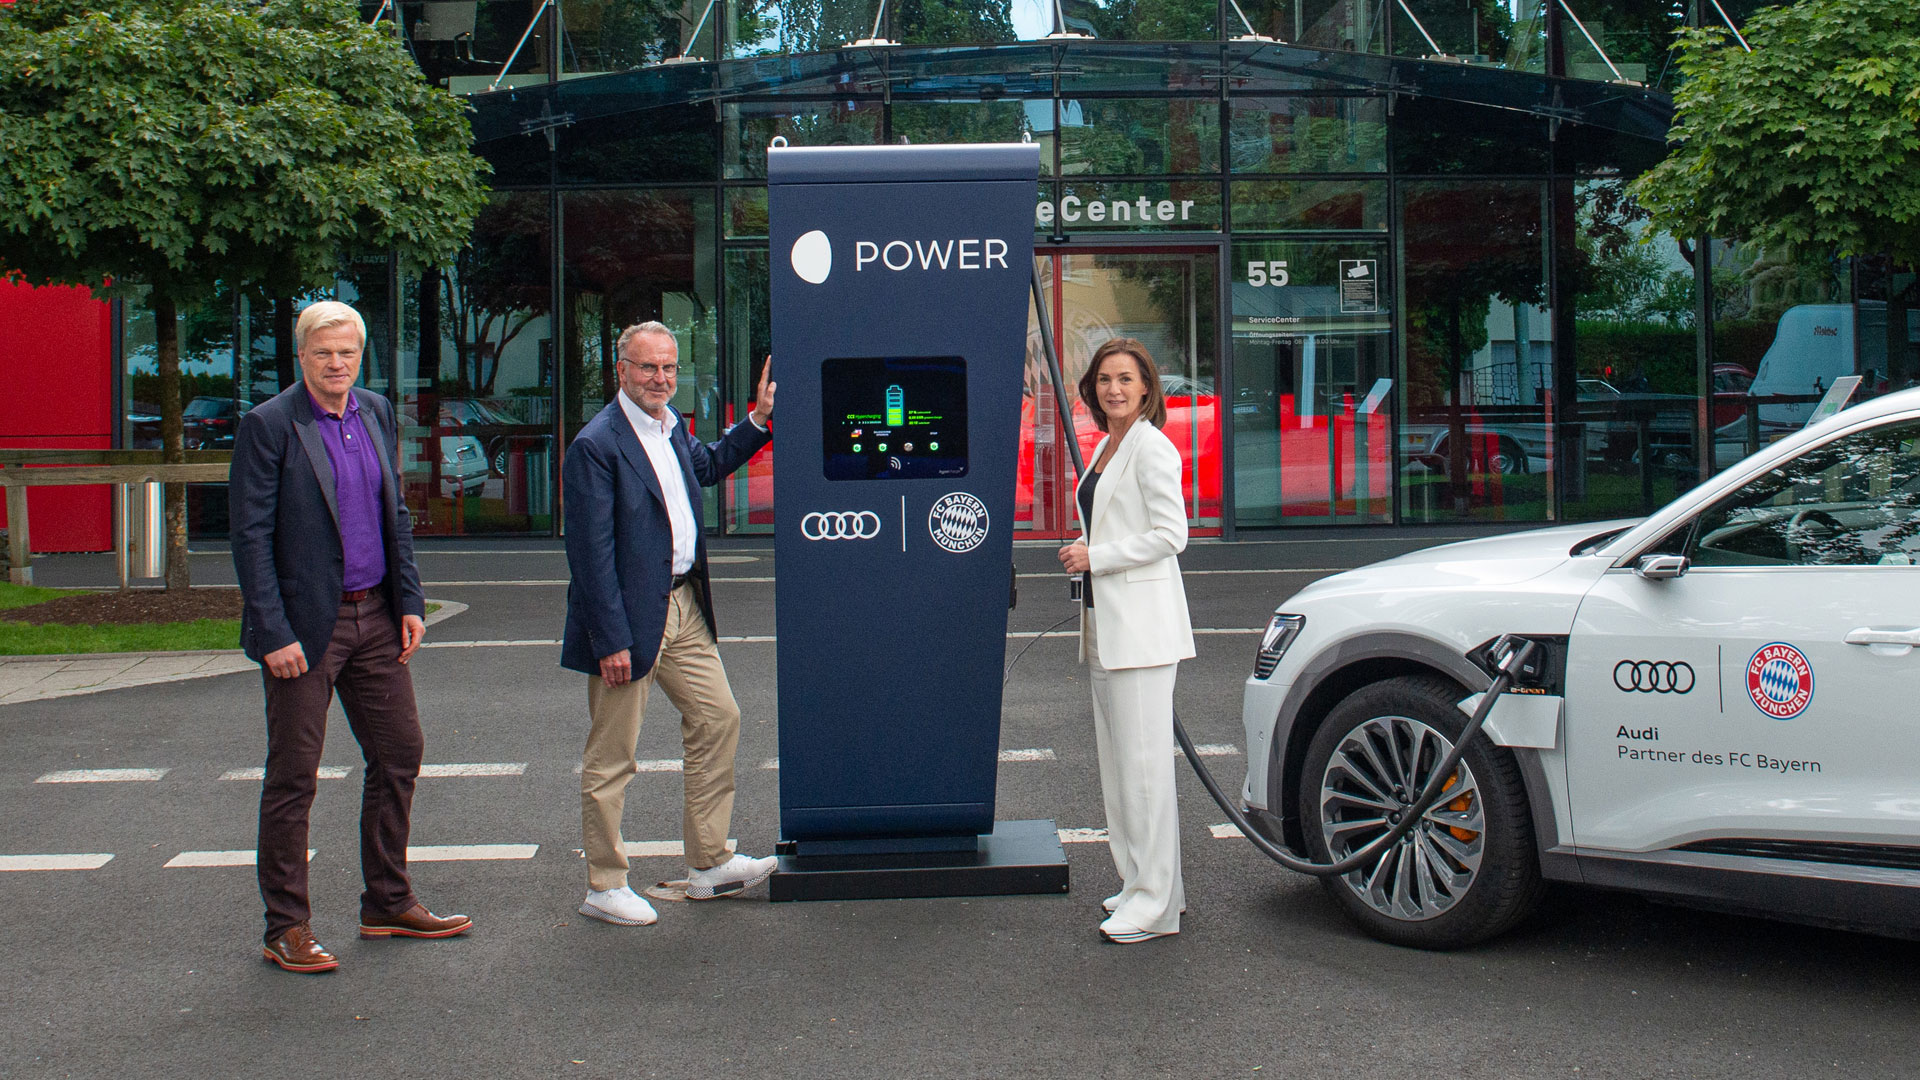 Audi Bayern Munich Are Committed To Sustainability